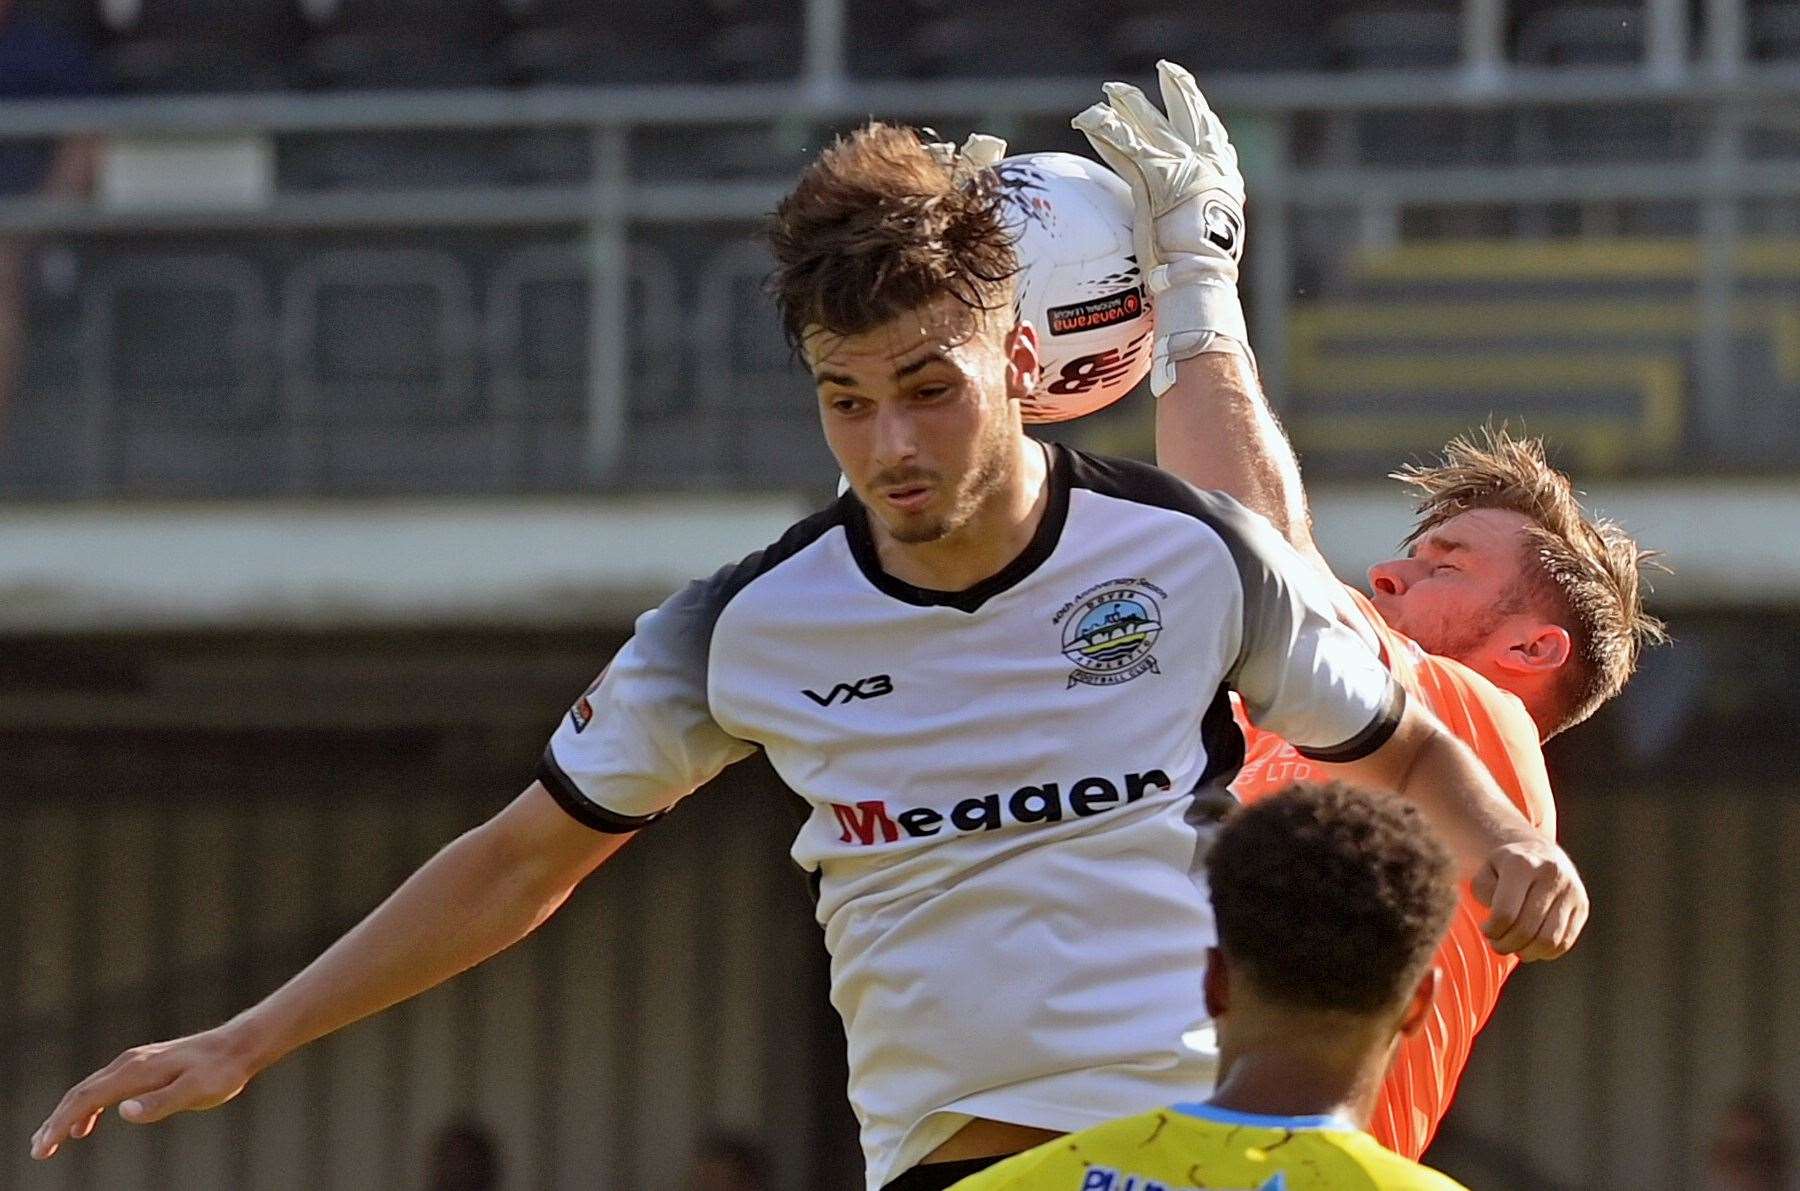 Dover striker George Nikaj – scored the winner but was also sent off in a dramatic ending to Whites’ 1-0 weekend win over Slough. Picture: Stuart Brock